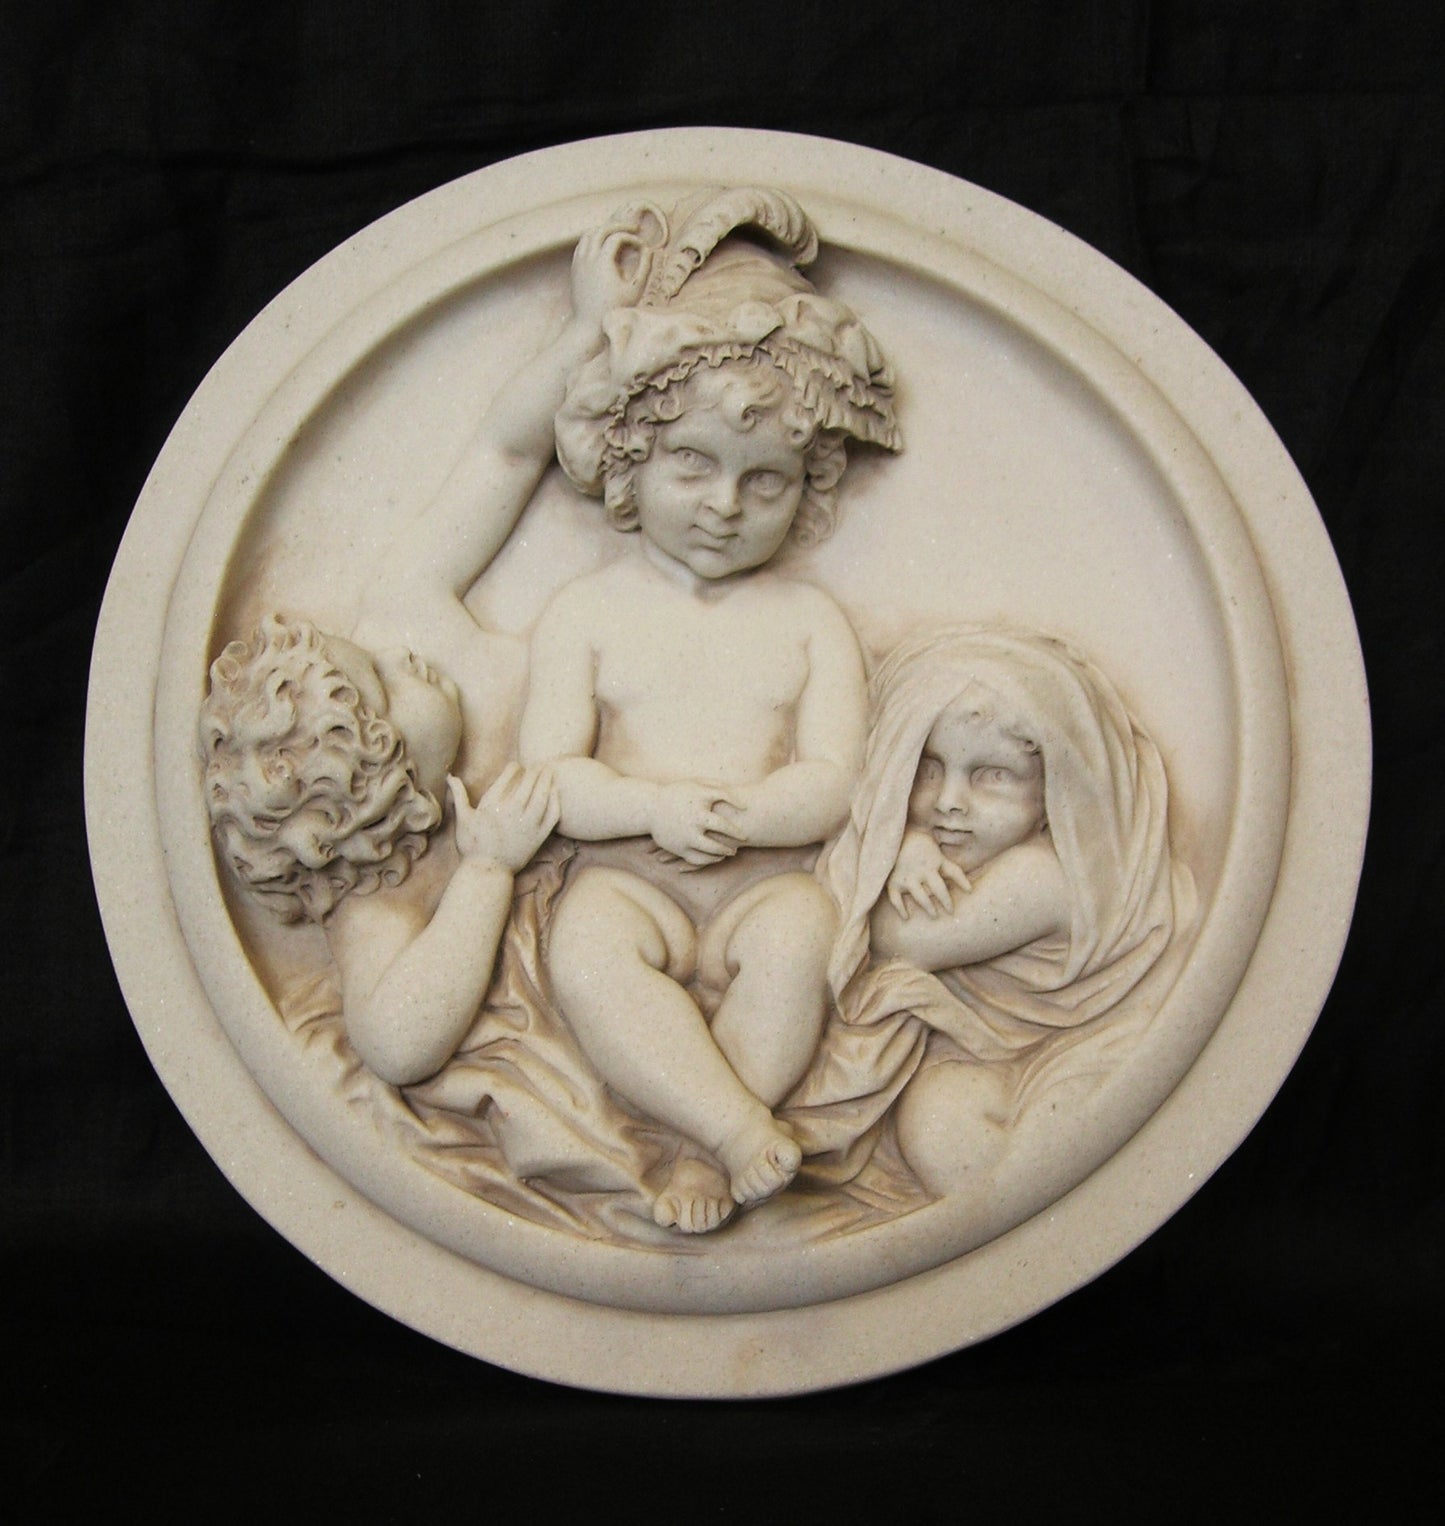 The Infant Academy Relief